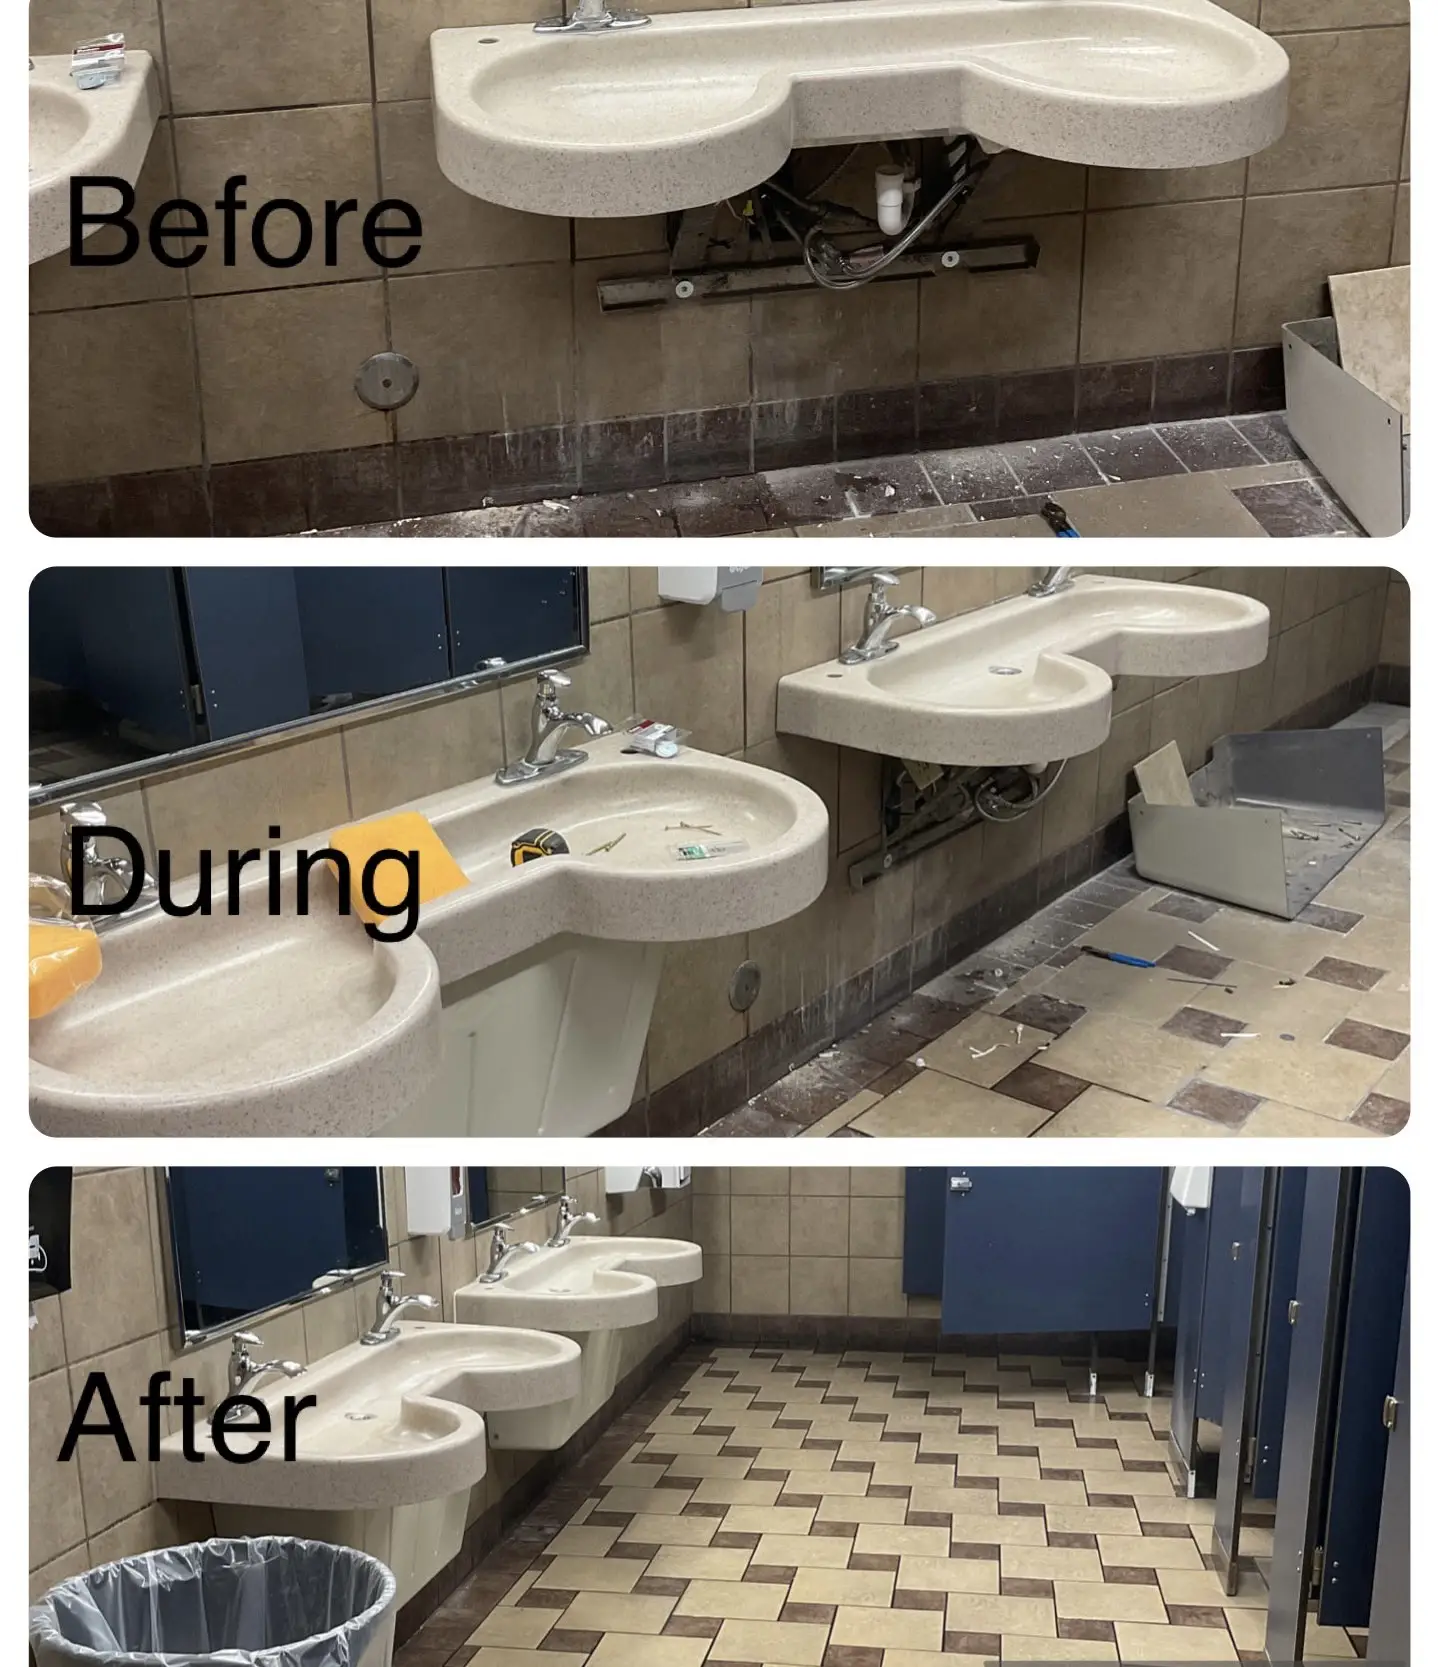 A commercial restroom with a damaged sink before, during, and after the sink has been fixed by Mr. Handyman.